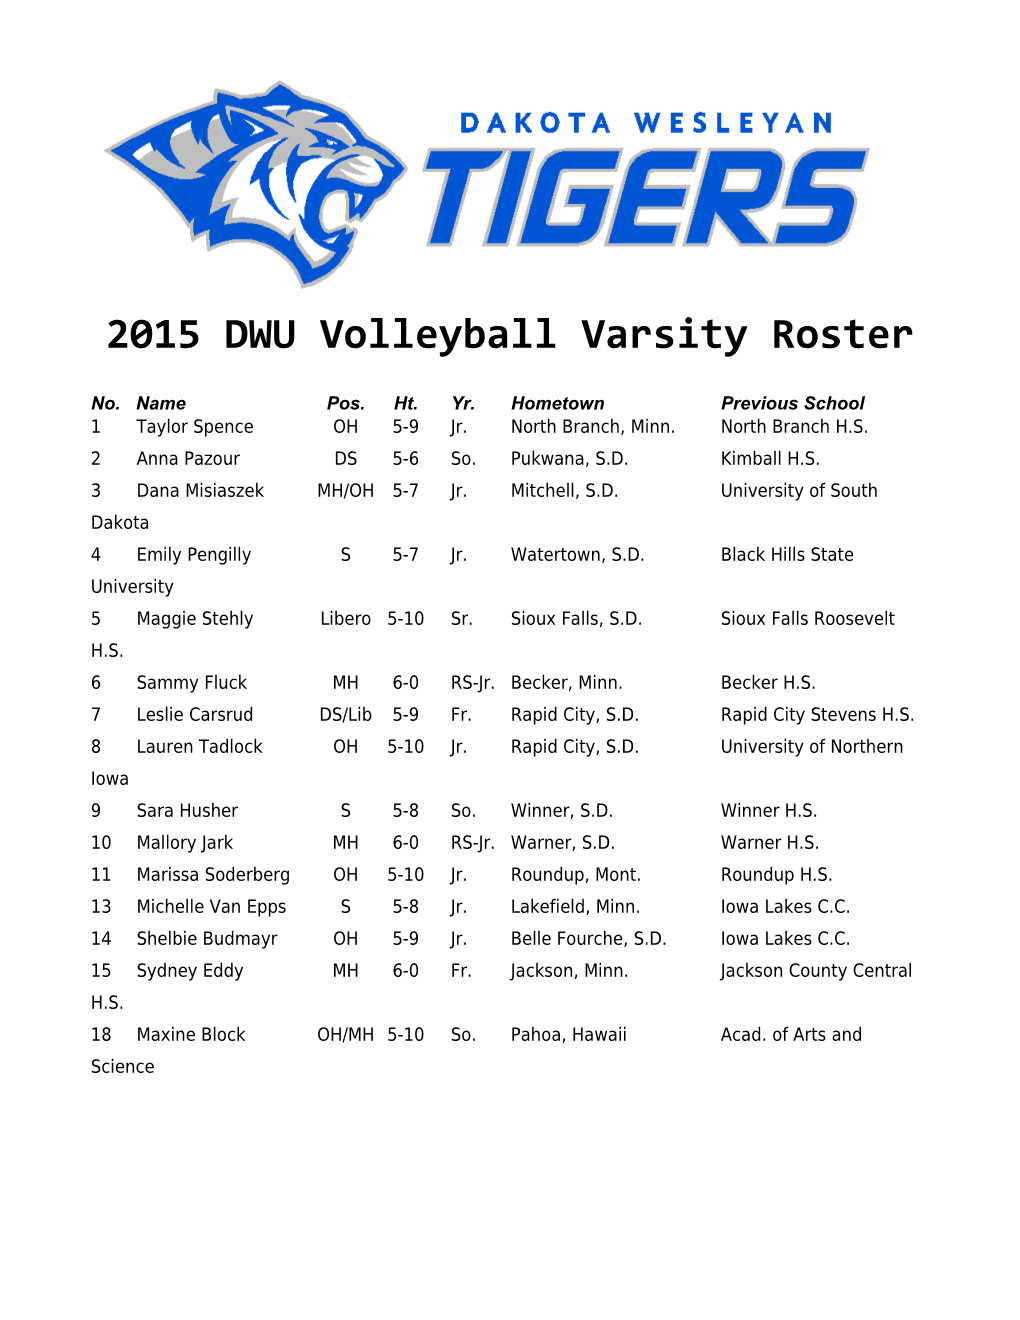 2005 Concordia University Volleyball Roster s1